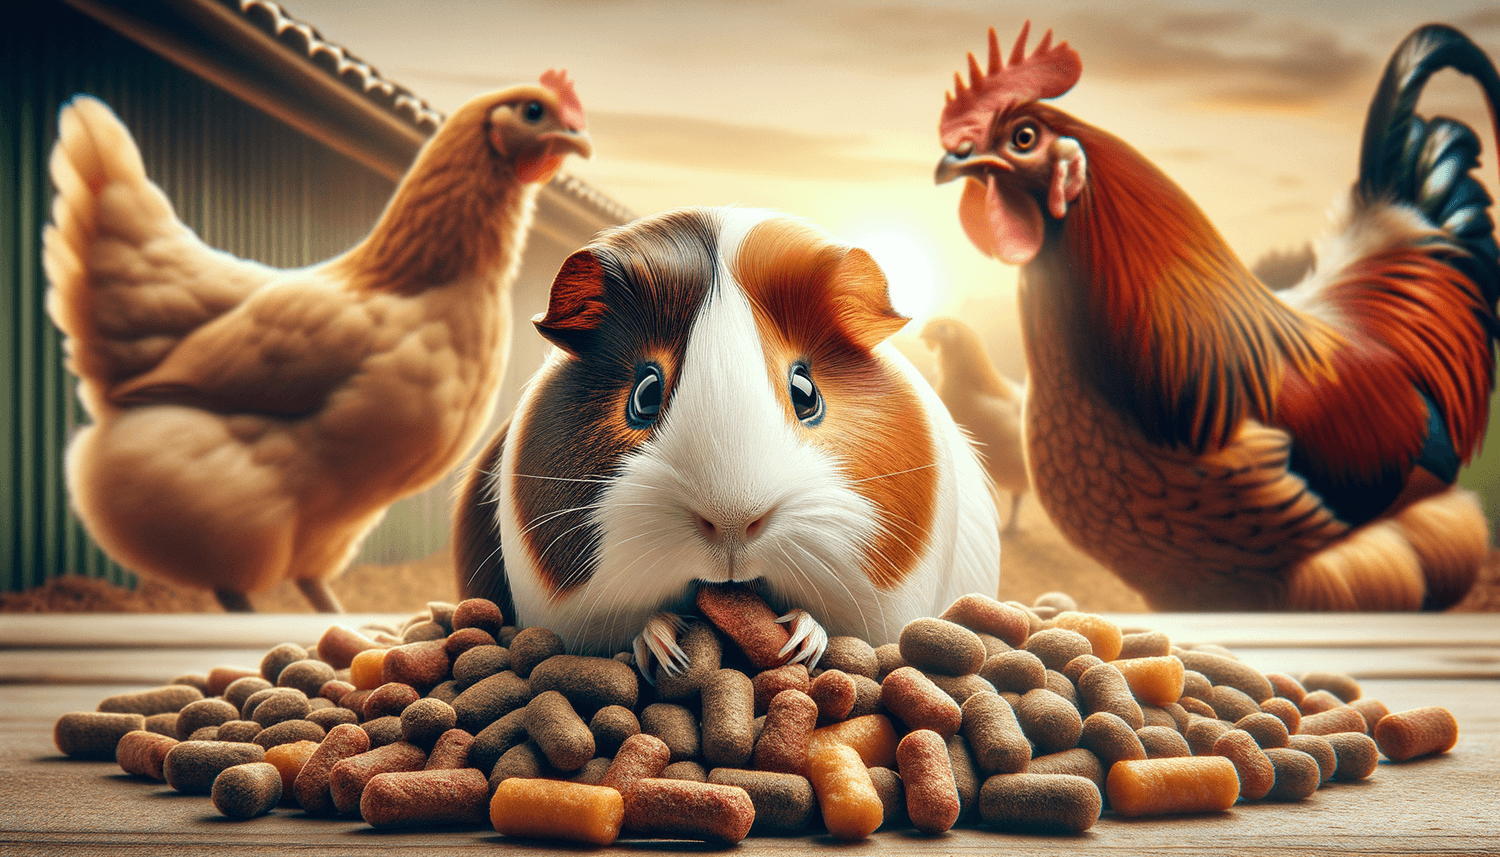 Can Chickens Eat Guinea Pig Food?